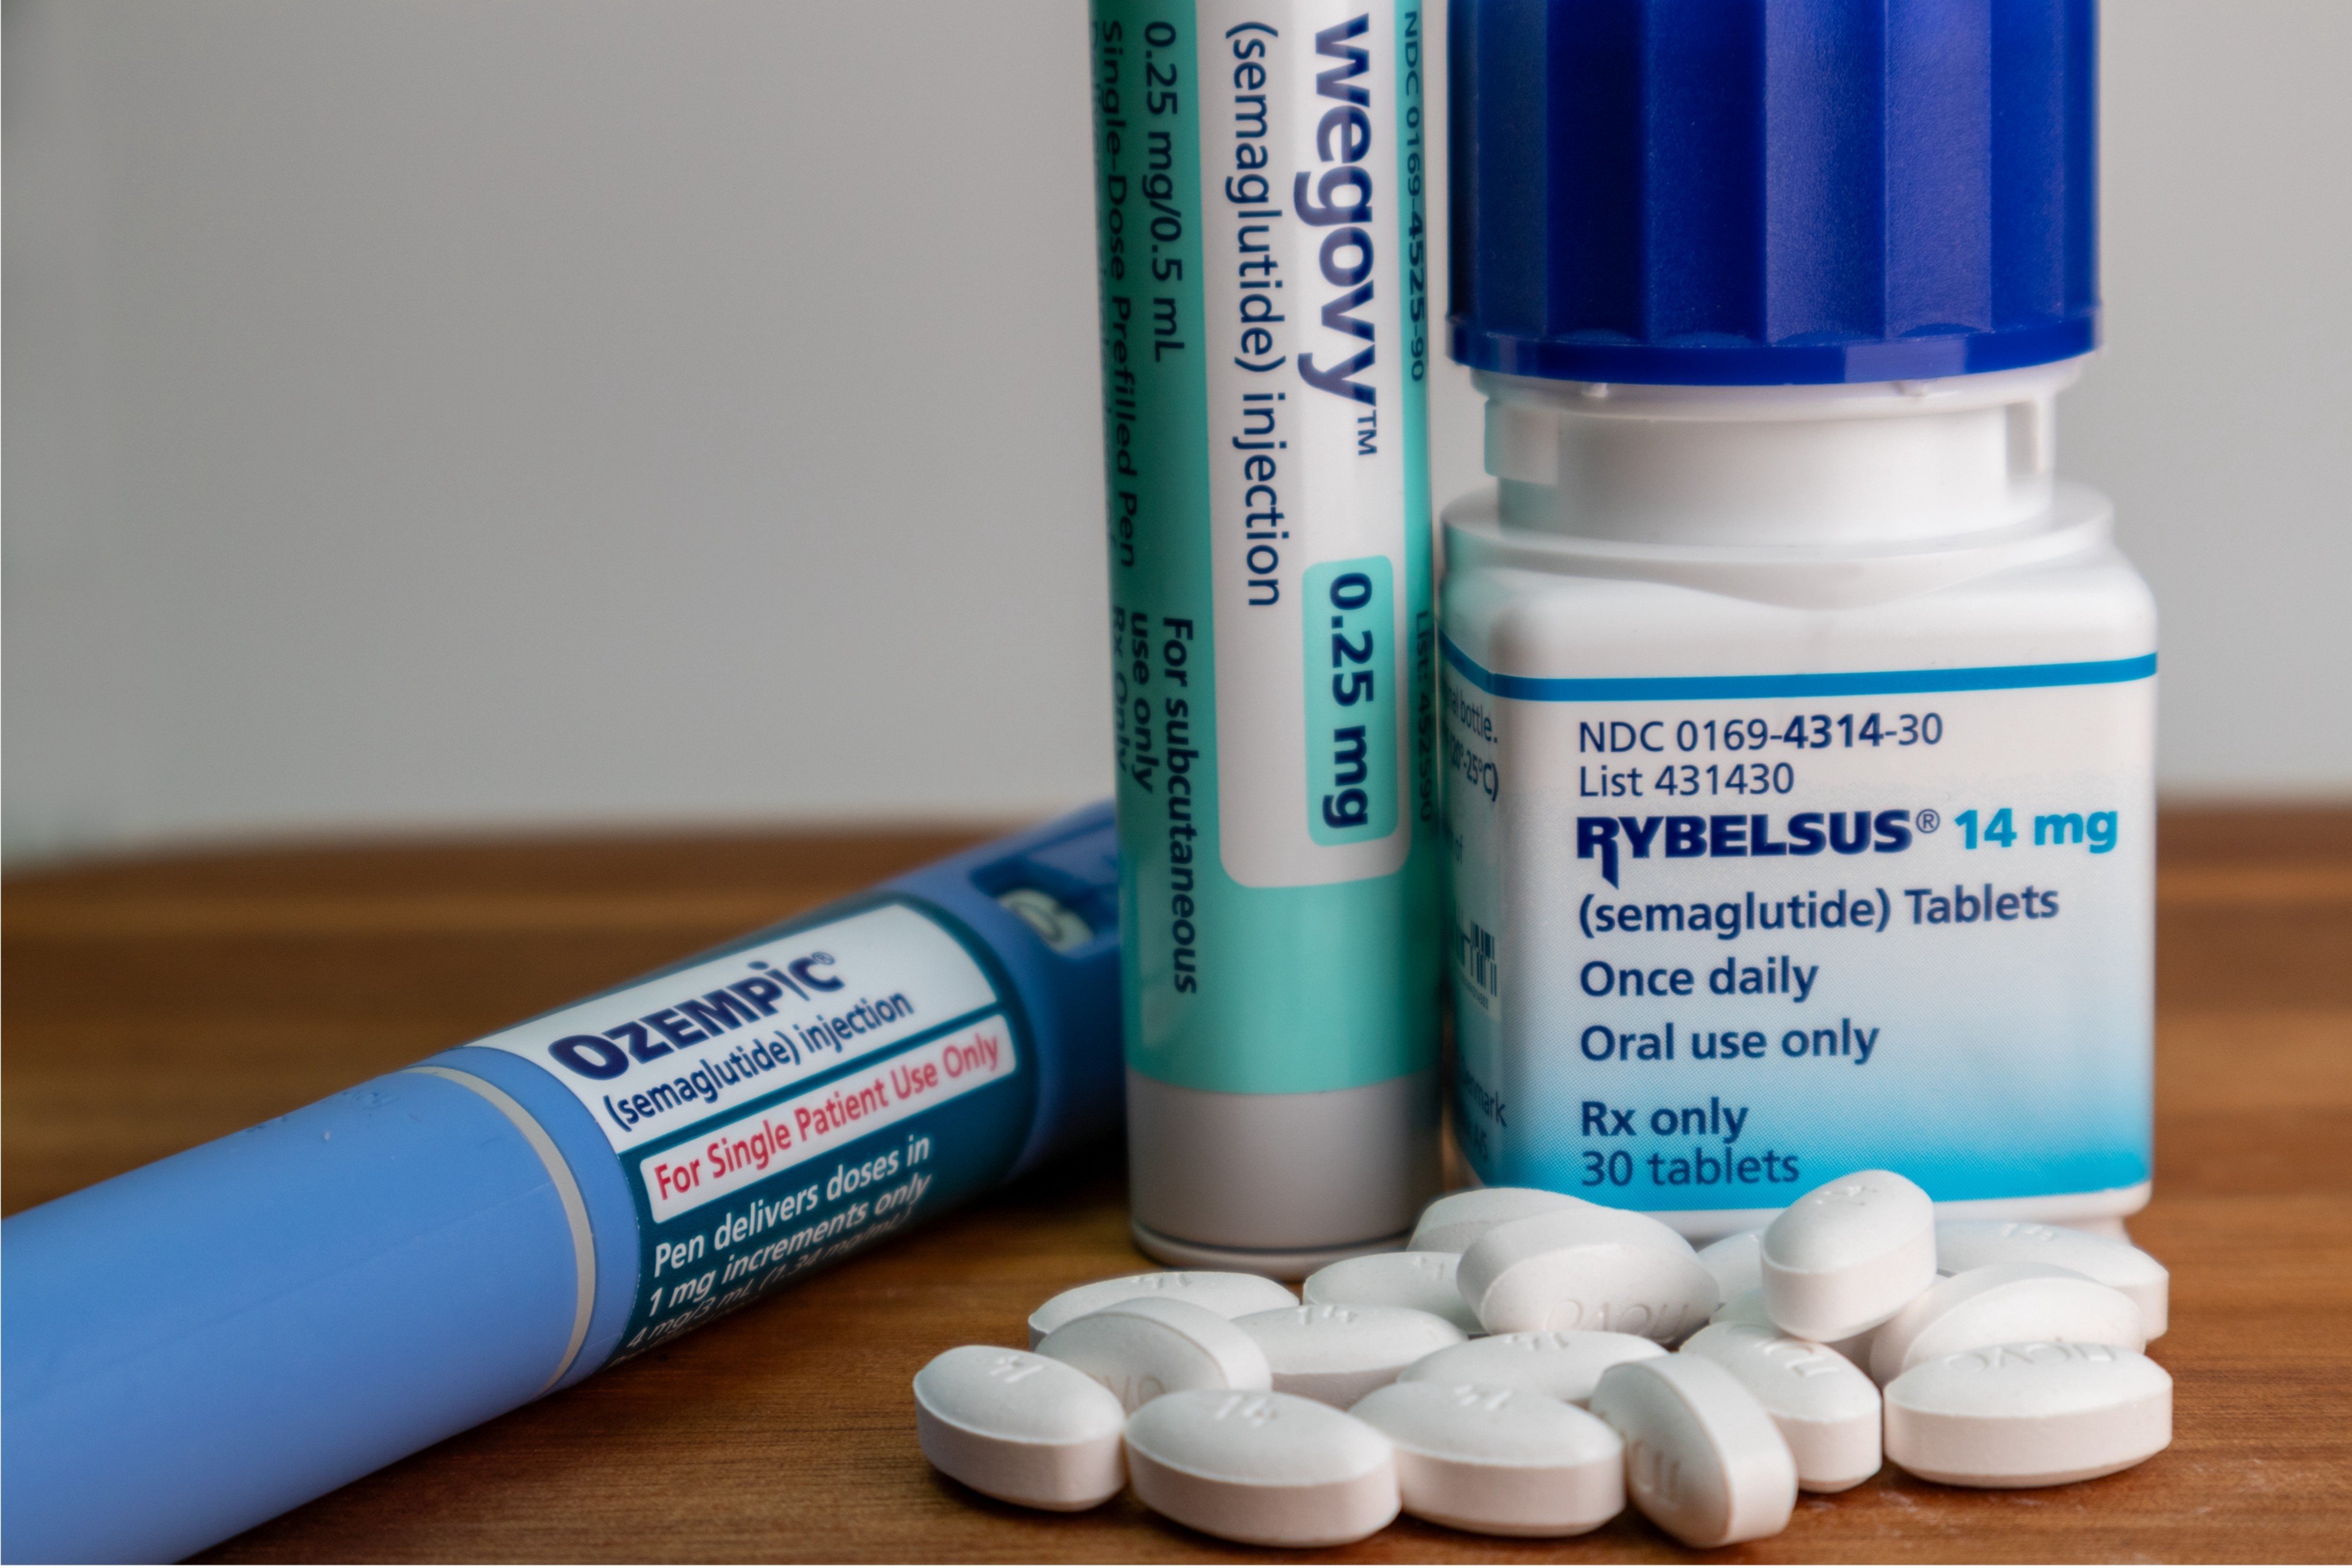 Ozempic, Wegovy and Rybelsus weight-loss drugs. A recent US study found most patients taking GLP-1 medications like these quit within 2 years. This is believed to be down to a mixture of their high cost and side-effects. Photo: Shutterstock